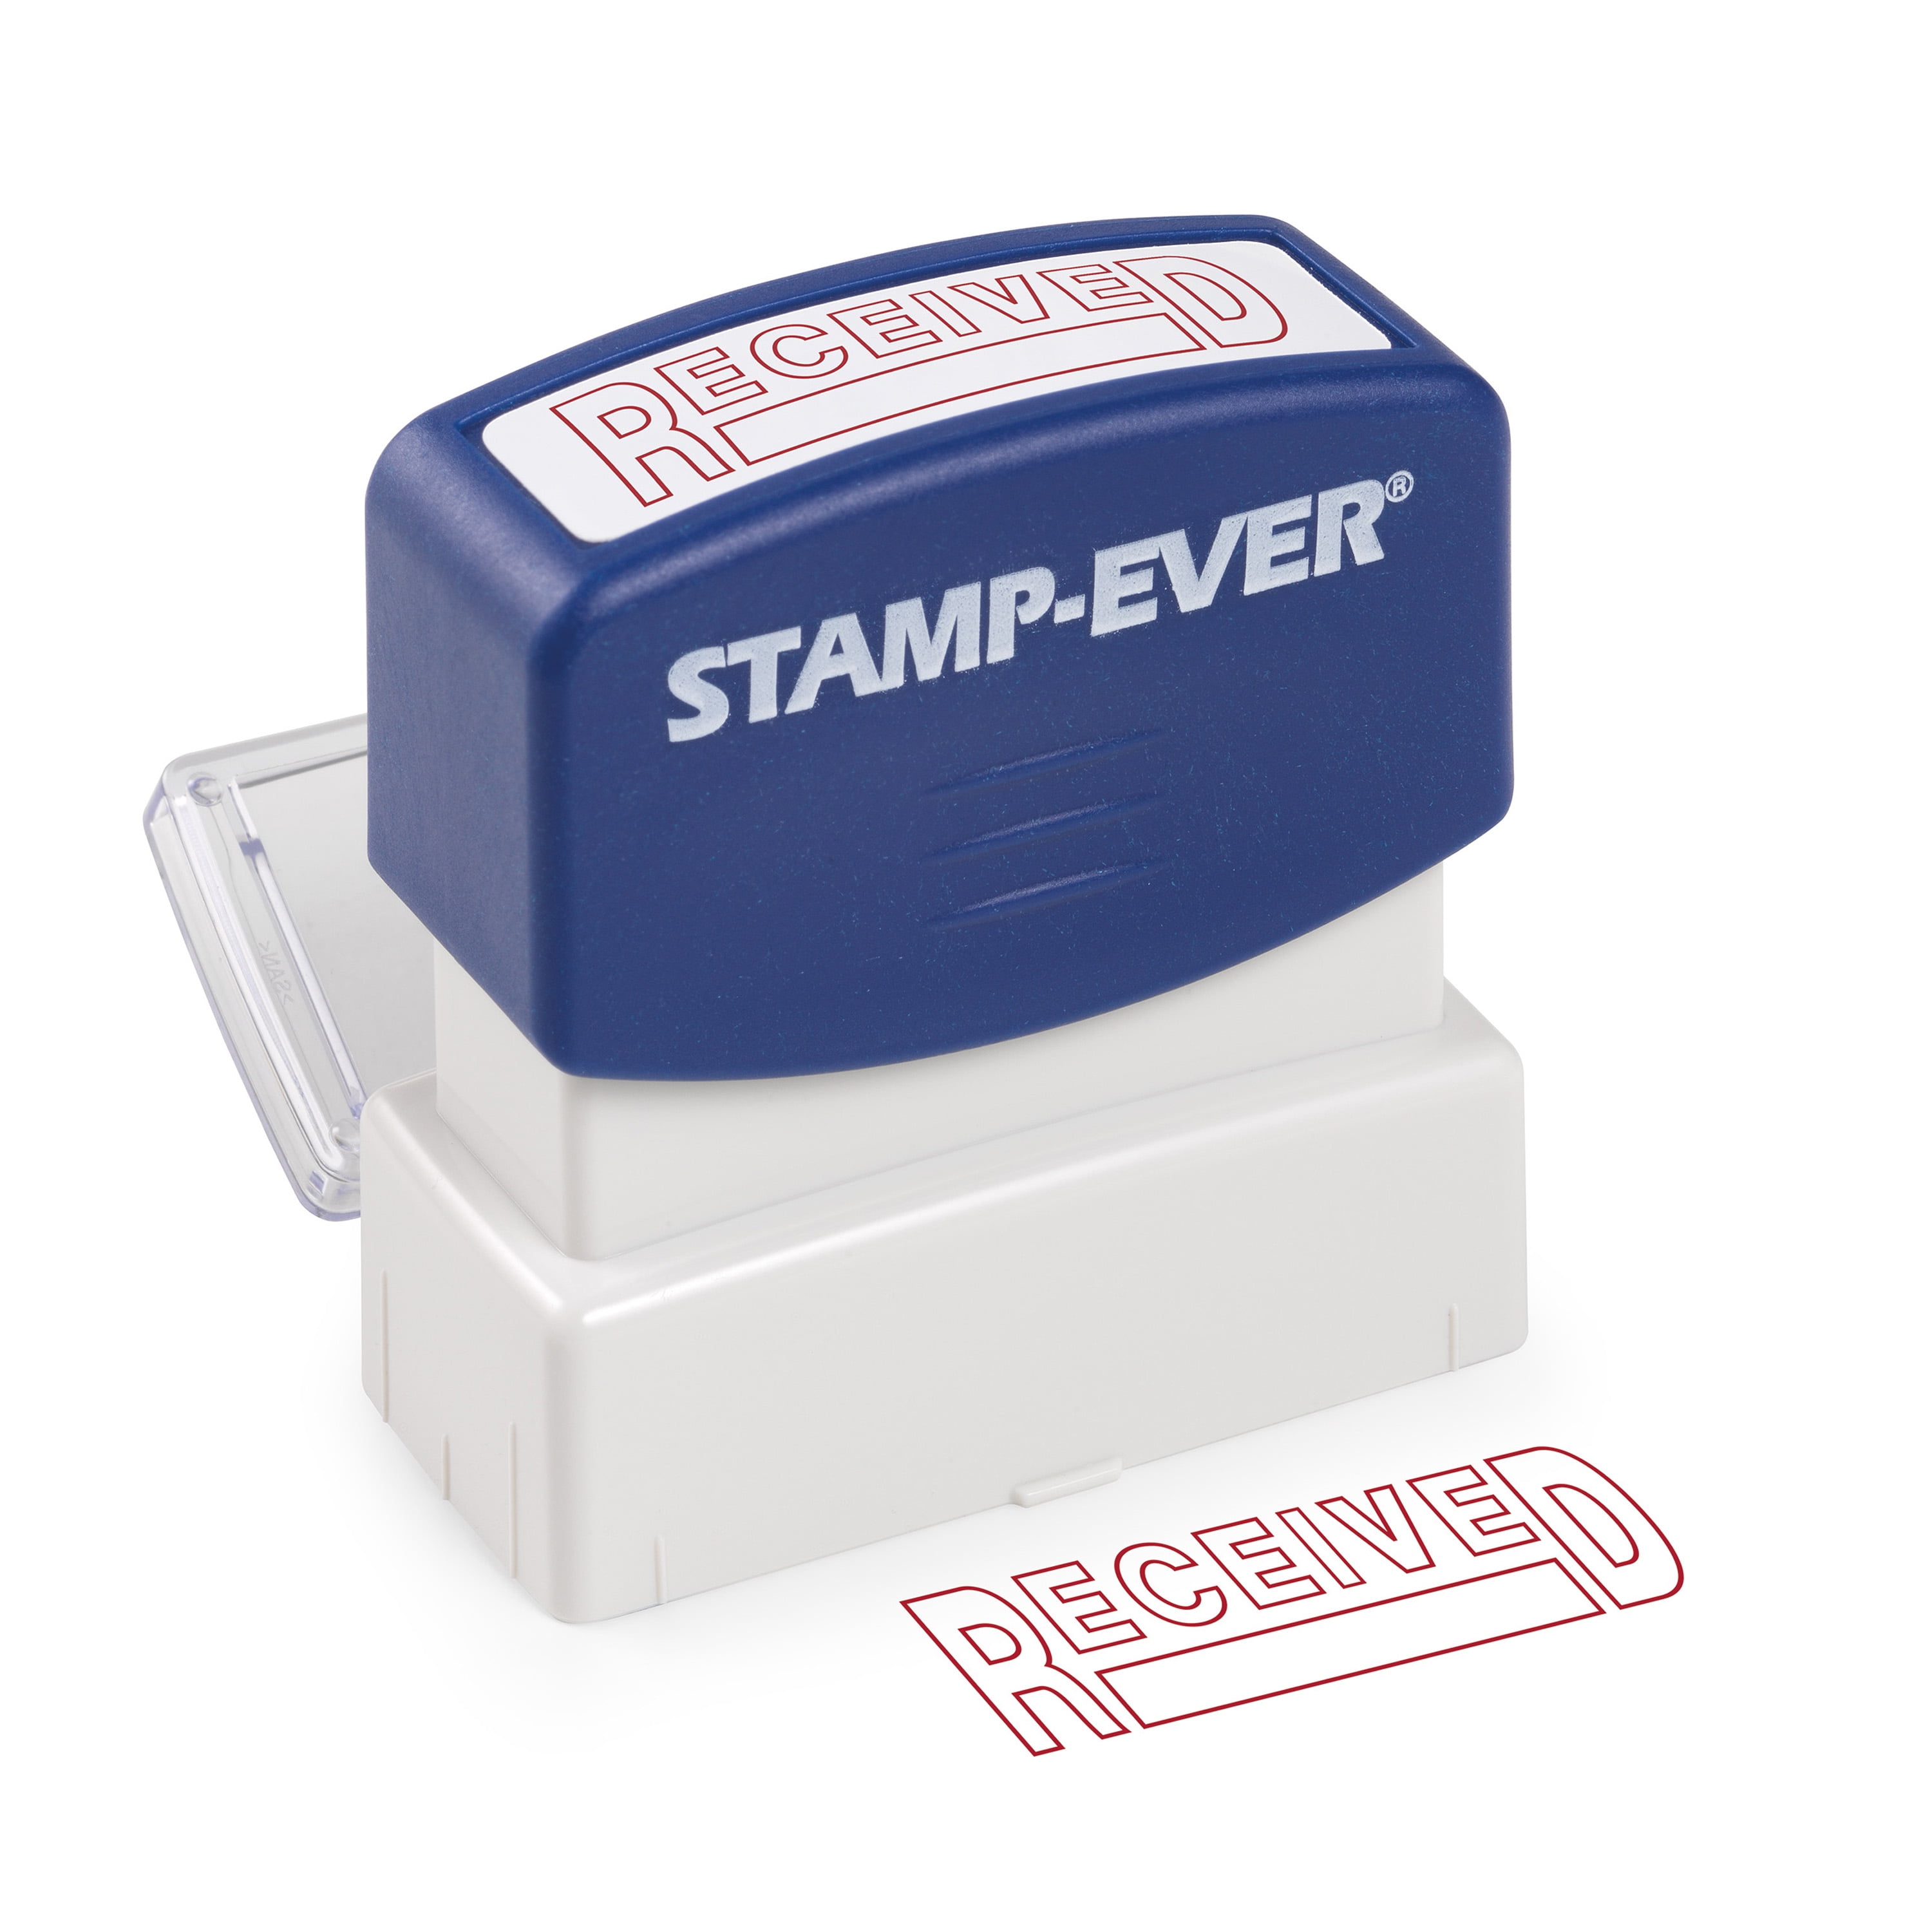 ExcelMark 7820 Self-Inking Rubber Date Stamp Great for Shipping, Receiving,  Expiration and Due Dates Blue Ink